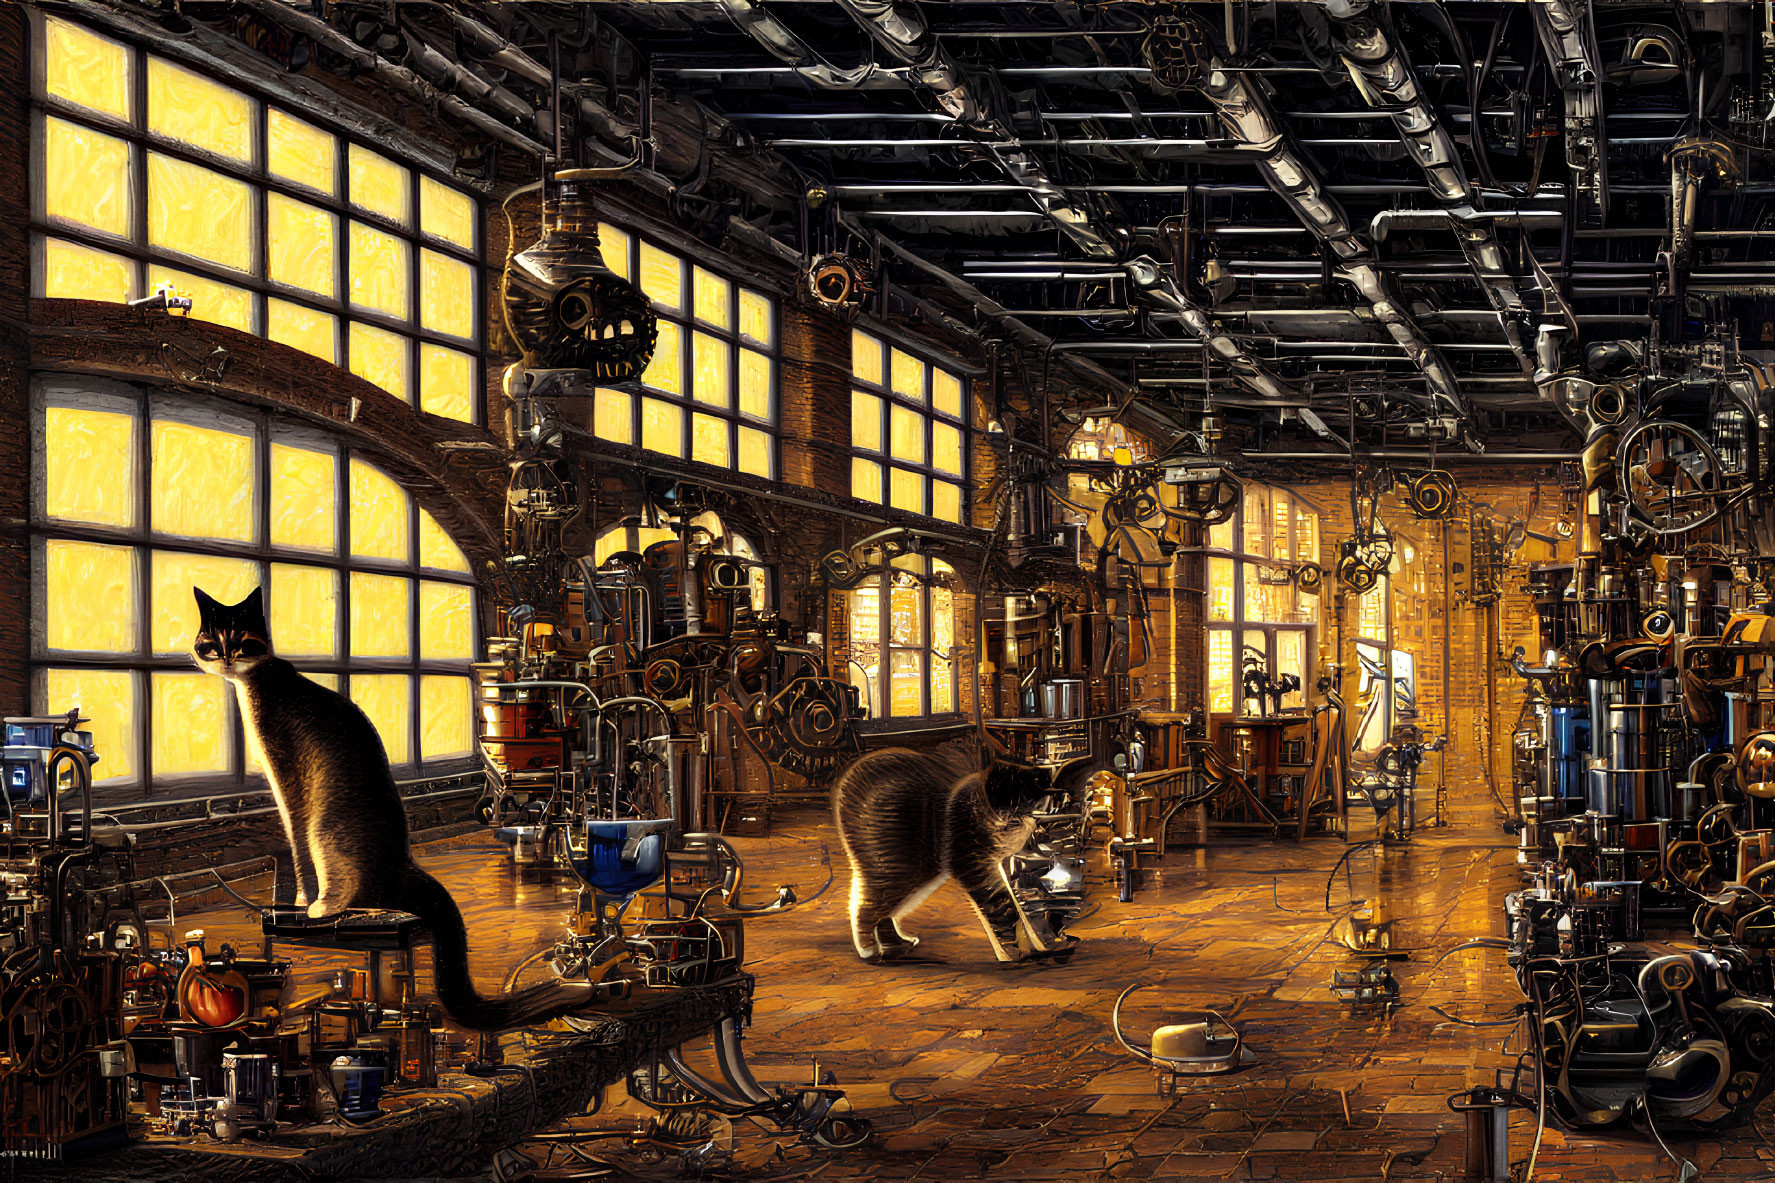 Steampunk-style room with glowing windows and cats among intricate machinery